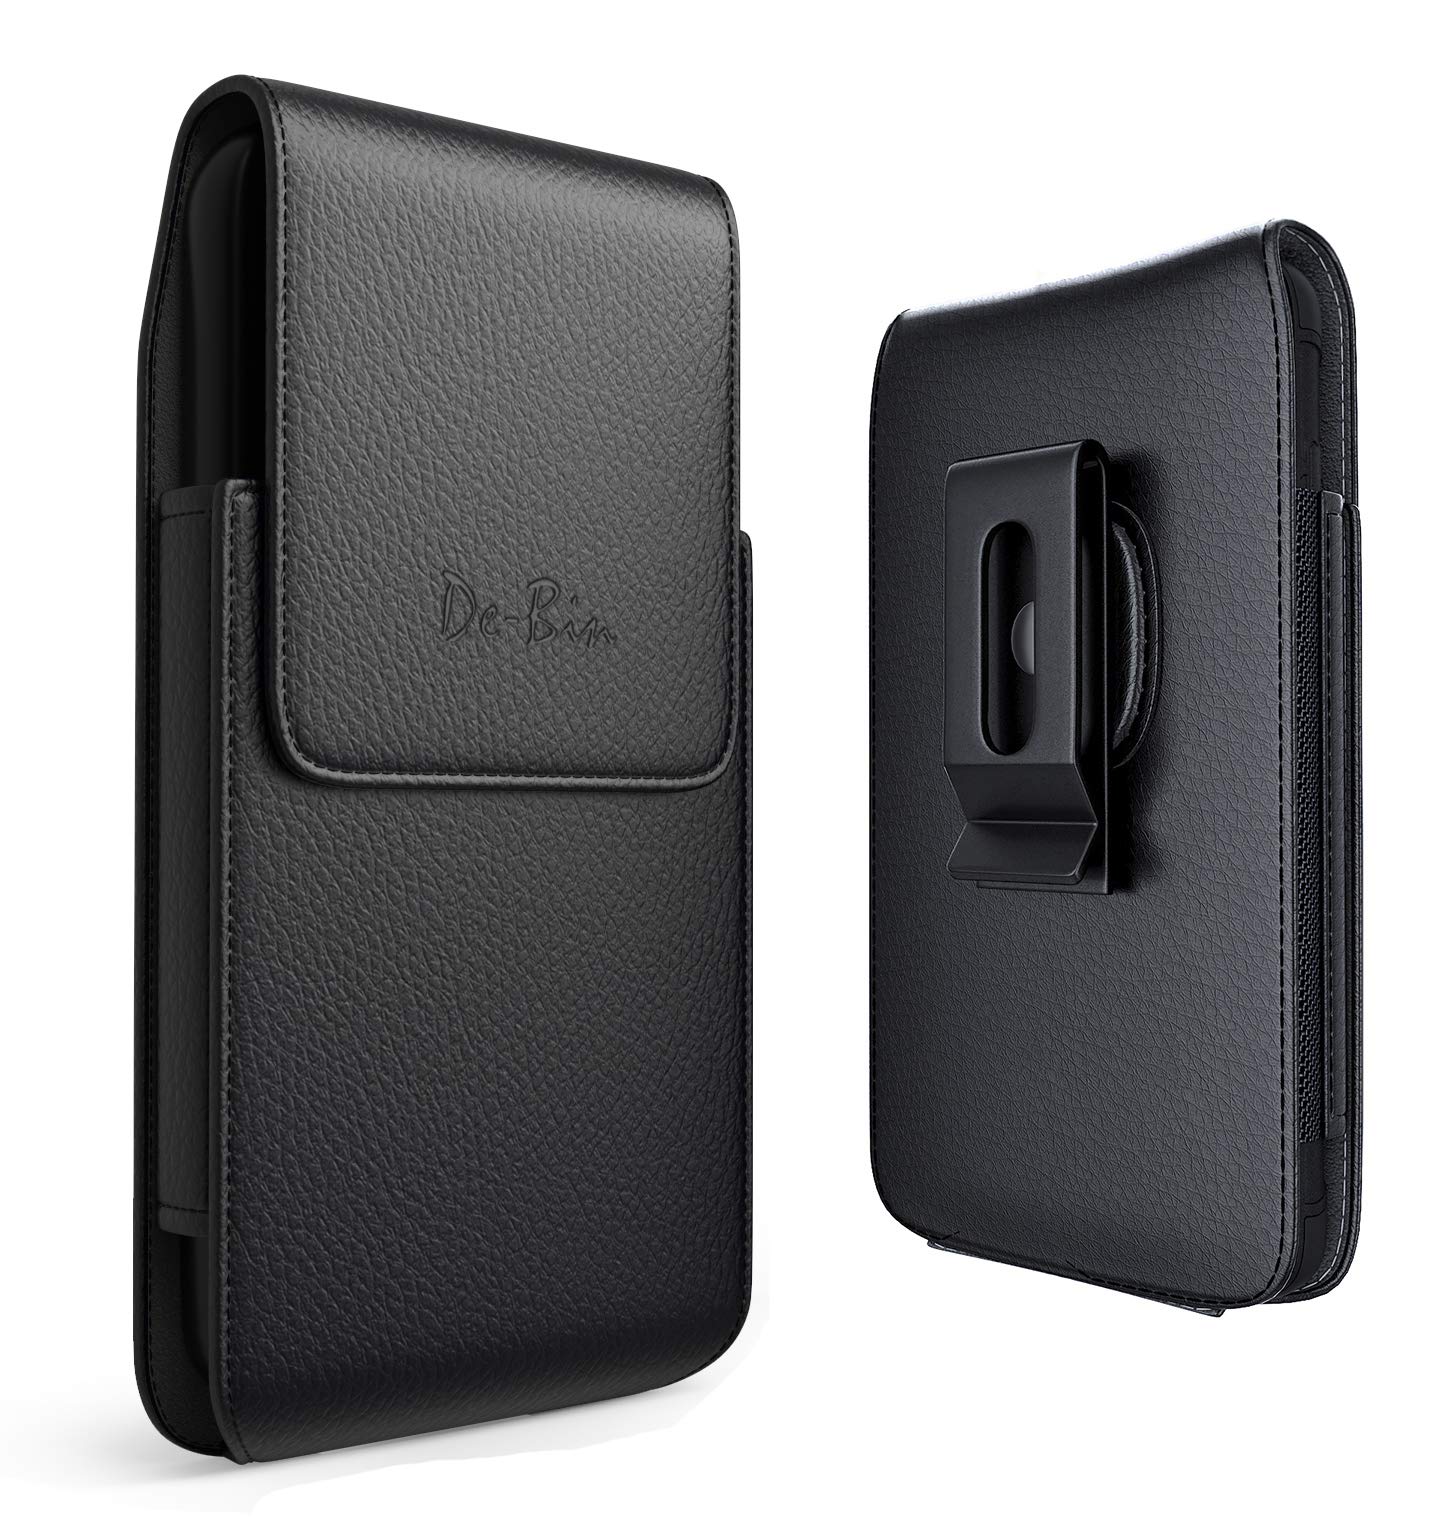 De-Bin Phone Holster Designed for iPhone 12 Pro Belt Holder Pouch Carrying Case Vertical and Horizontal Sleeve Holder Swivel Belt Clip Fit Apple iPhone 12 Pro / 12 / 11 / XR with other Case on - Black